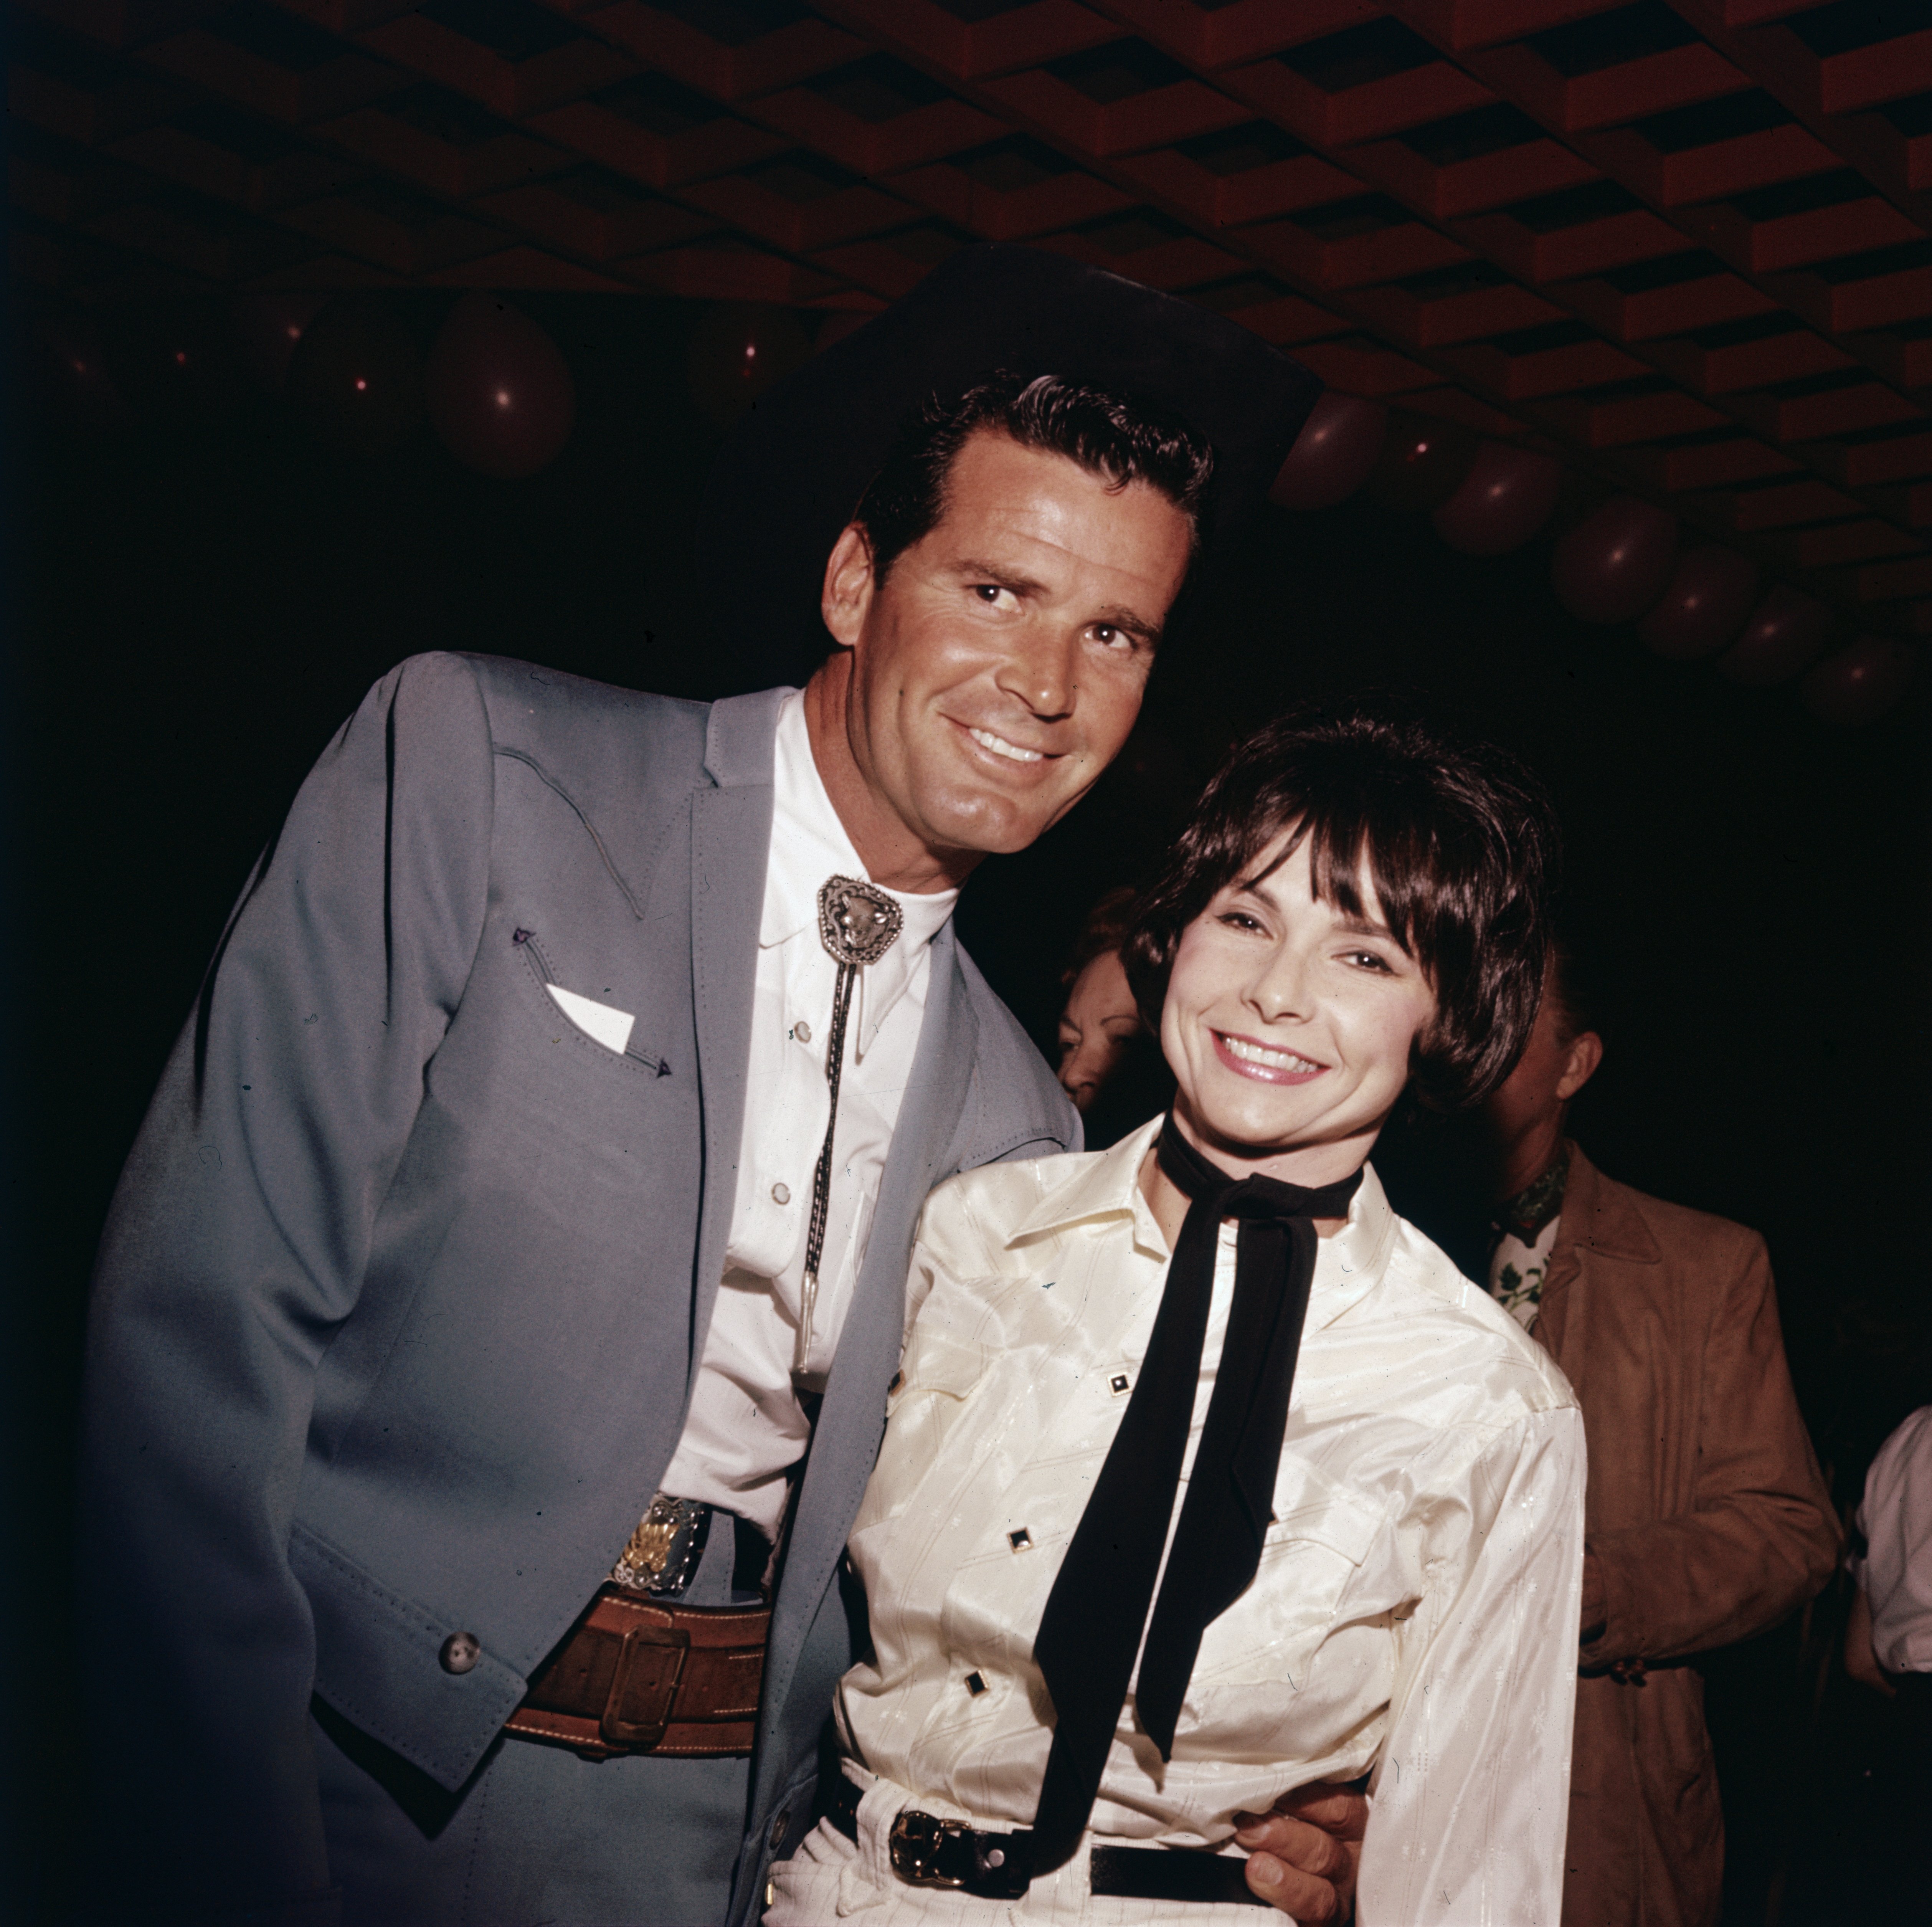 Circa 1965, American actor James Garner smiles with his wife, Lois Clarke, as they wear Western gear at a party in the 1960s. | Source: Getty Images